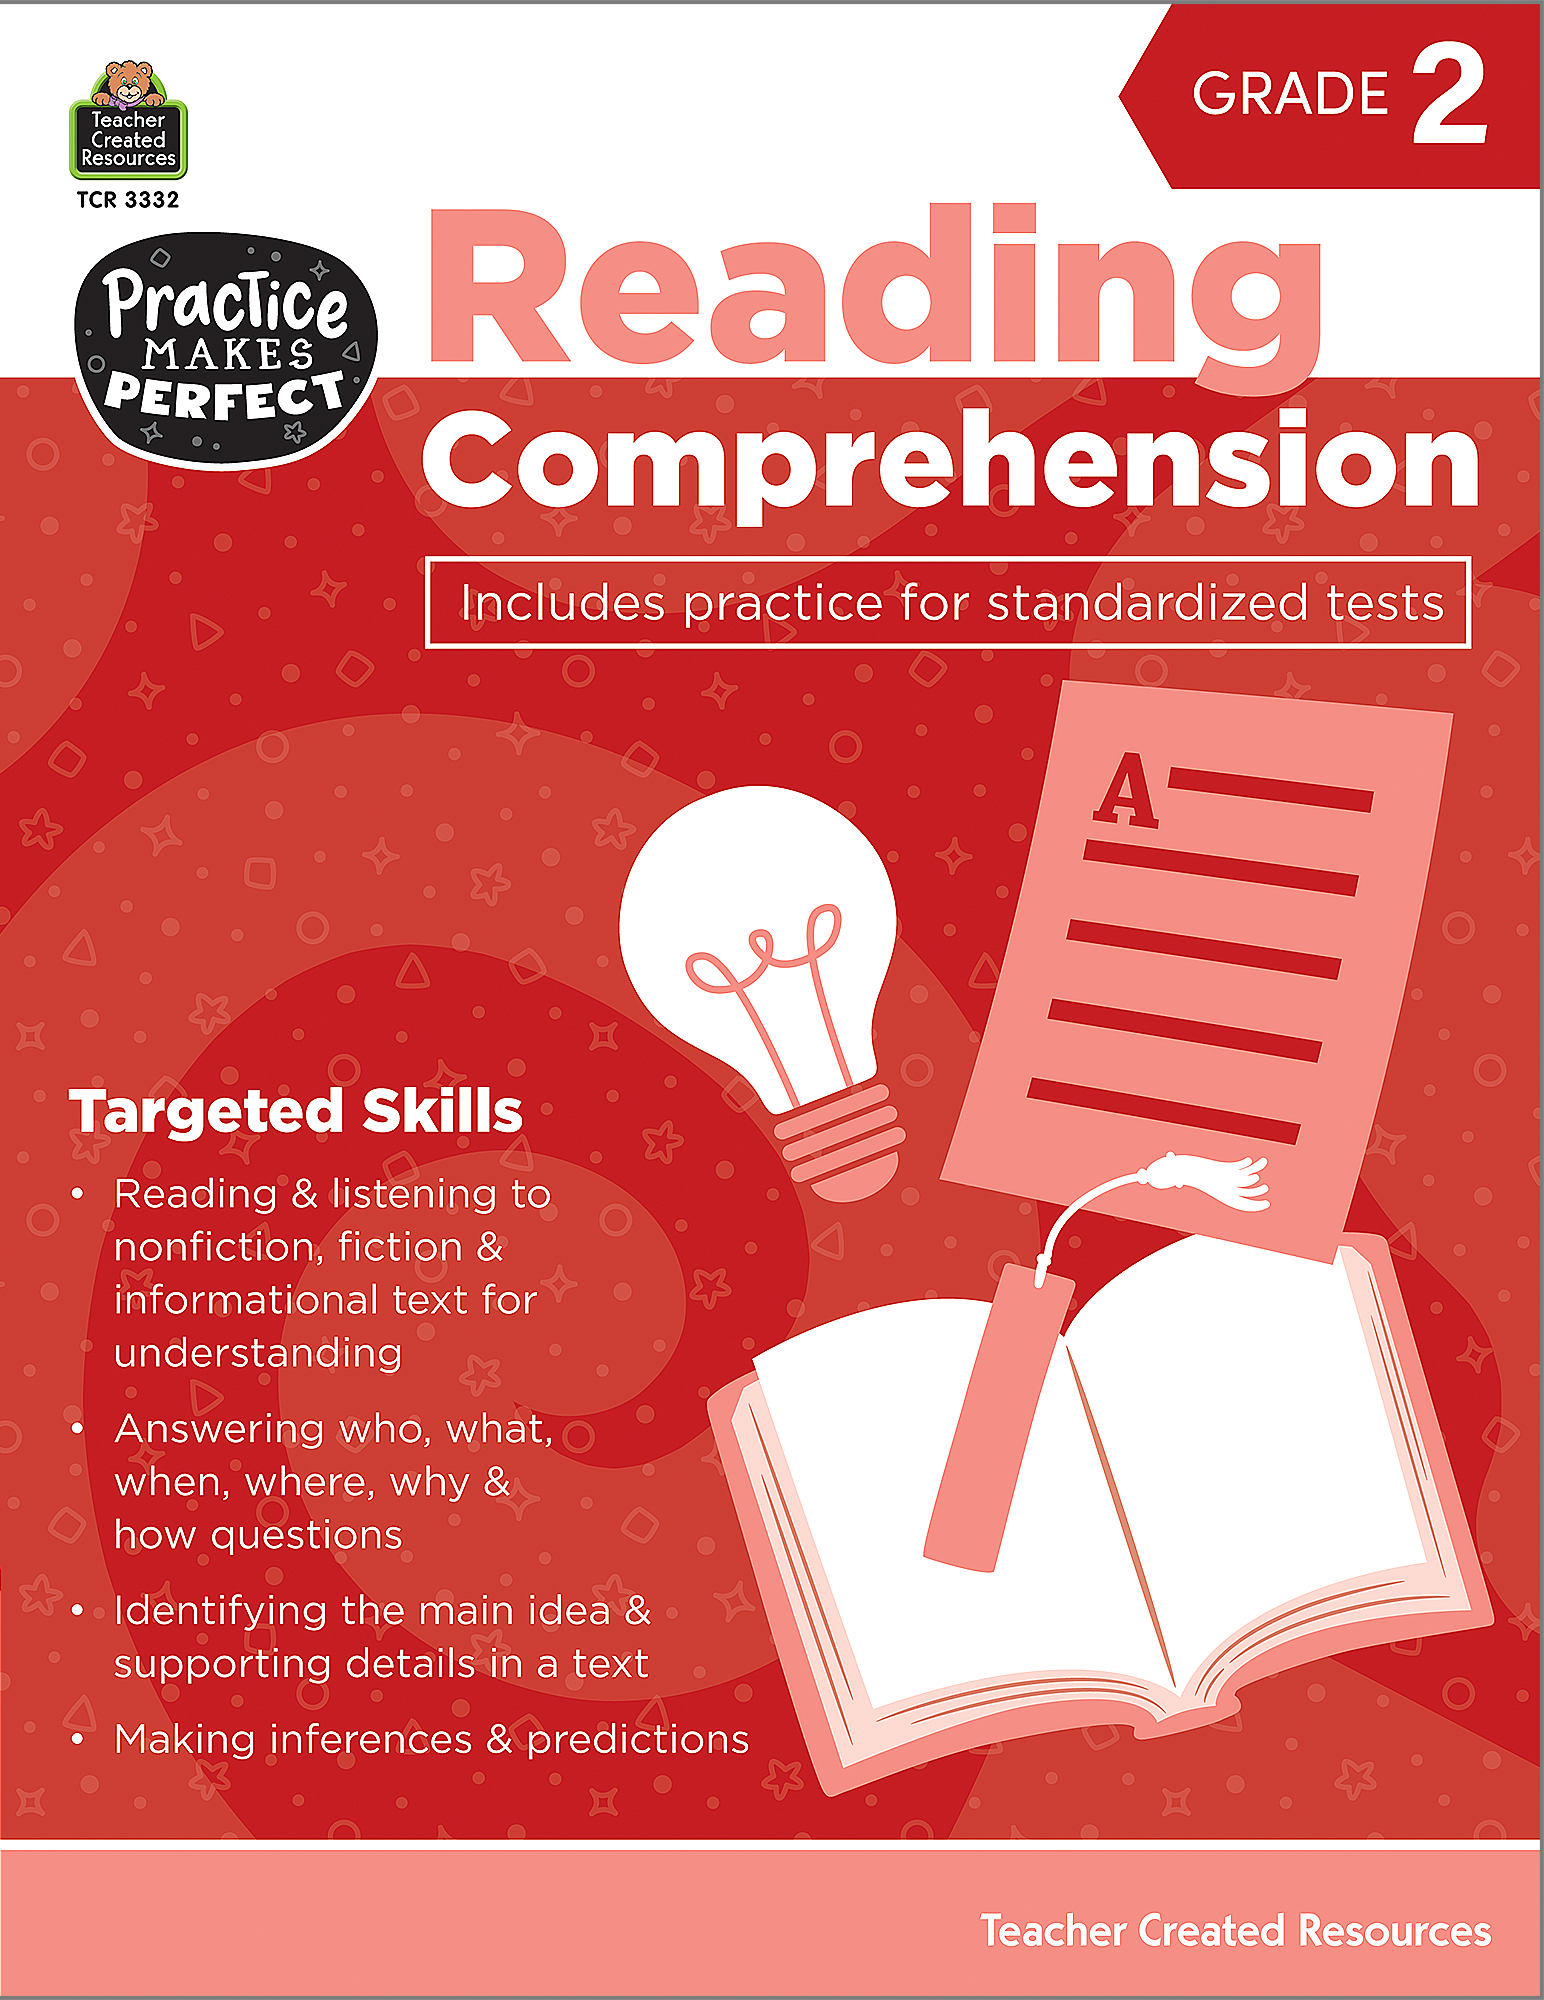 reading-comprehension-grade-2-tcr3332-teacher-created-resources